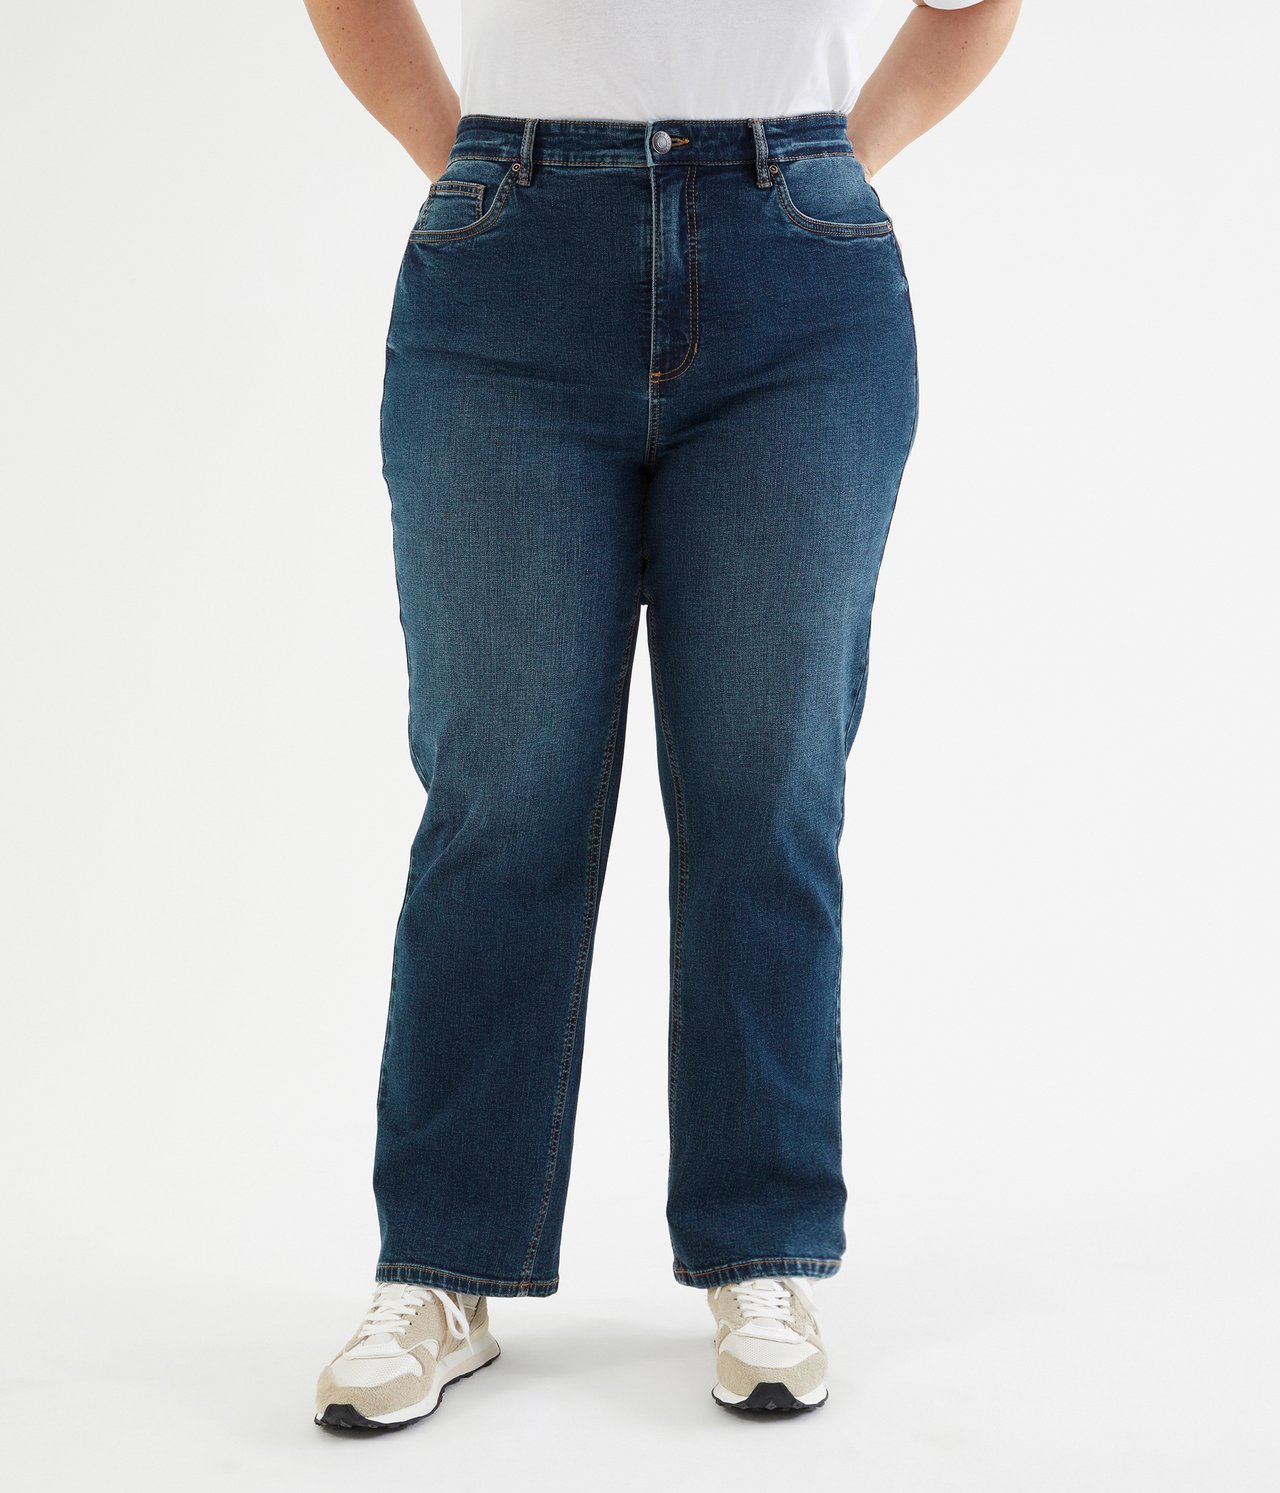 Penny jeans straight fit - Denimi - 2